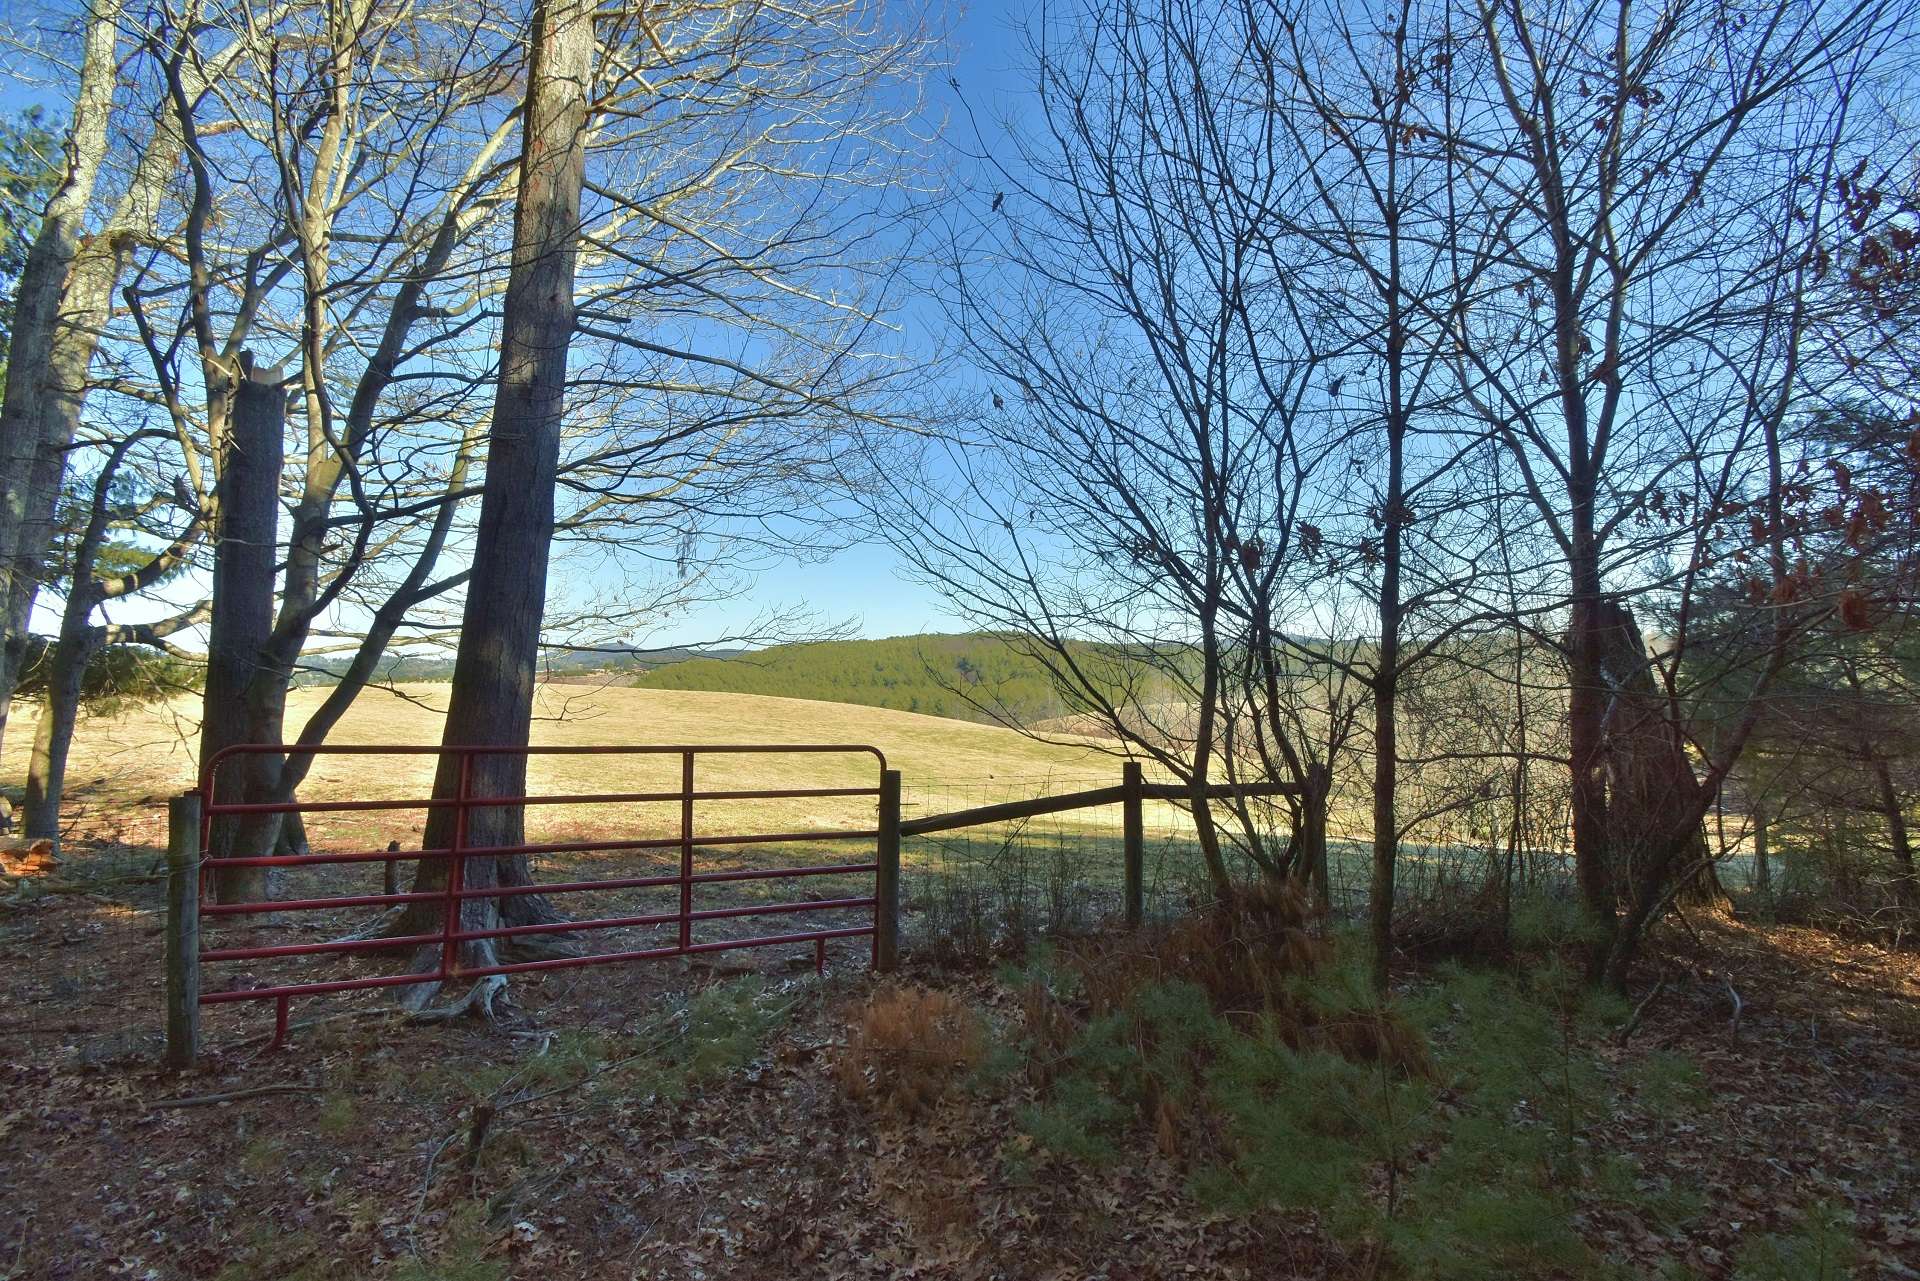 You might want to build on this spot with views of the neighboring pasture land with the mountains beyond.